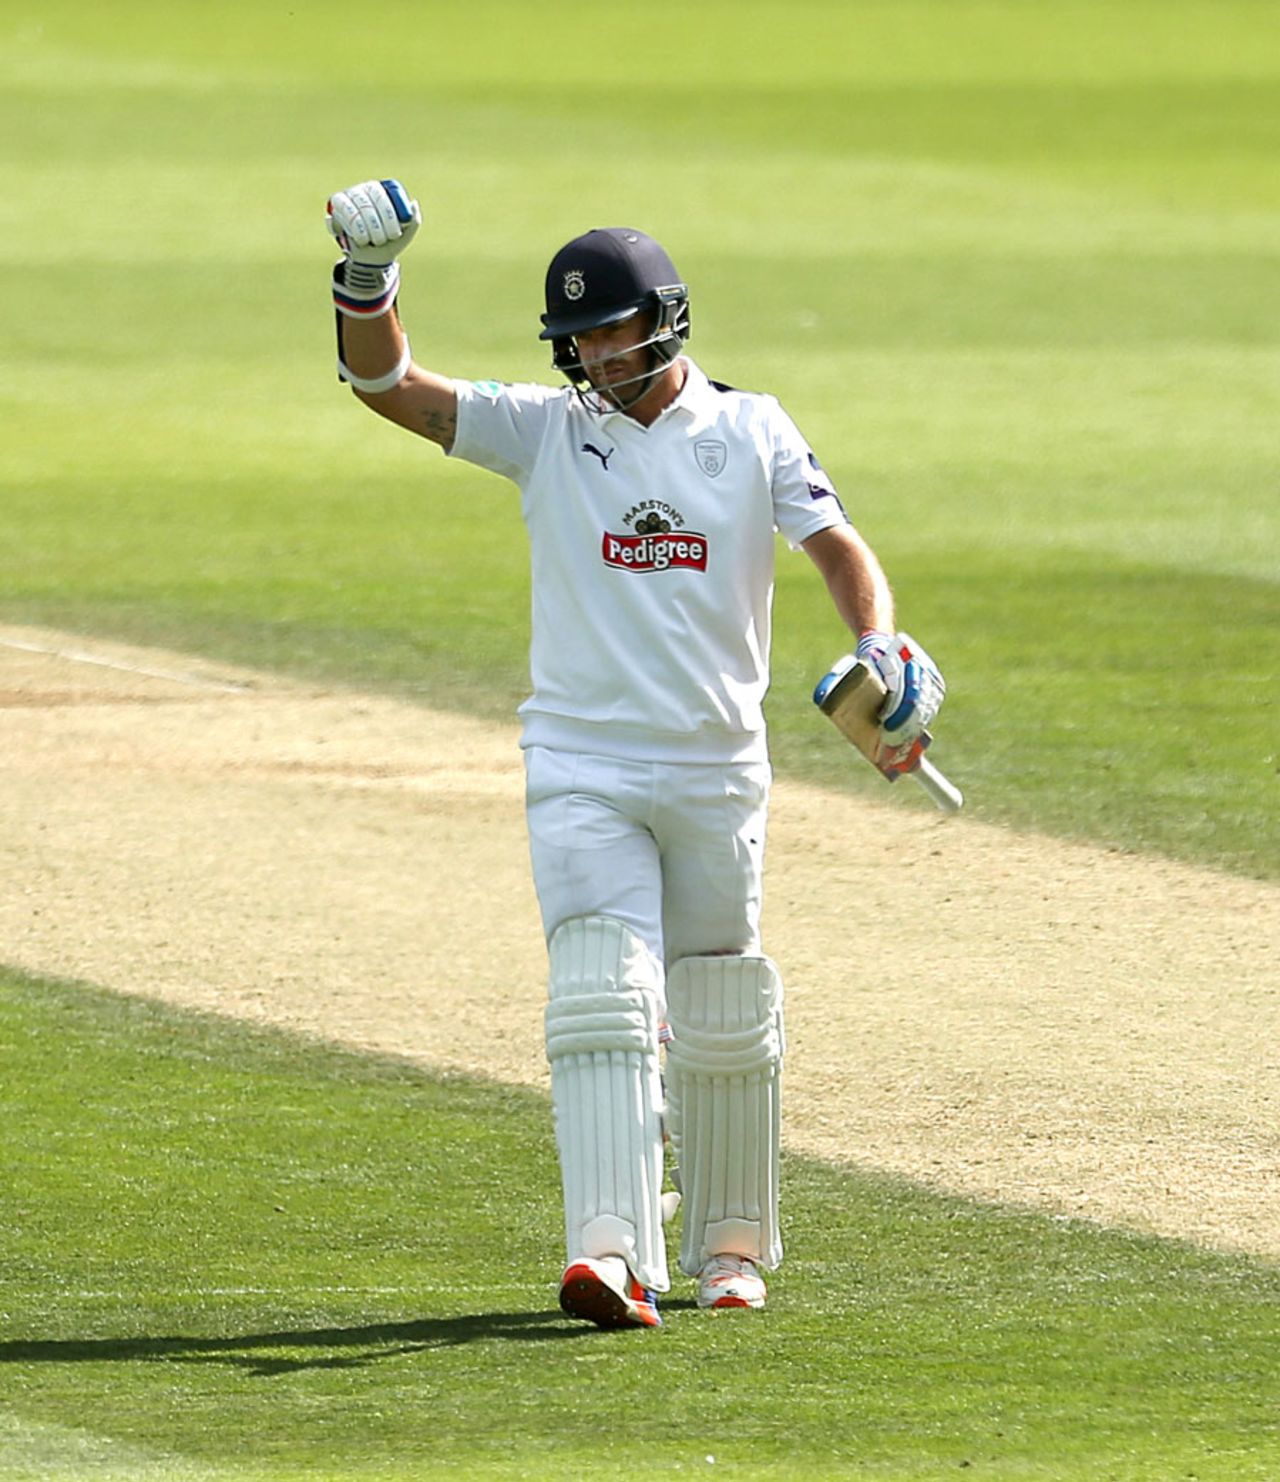 Sean Ervine punches the air after reaching his century, Surrey v Hampshire, County Championship, Division One, The Oval, 2nd day, September 8, 2016